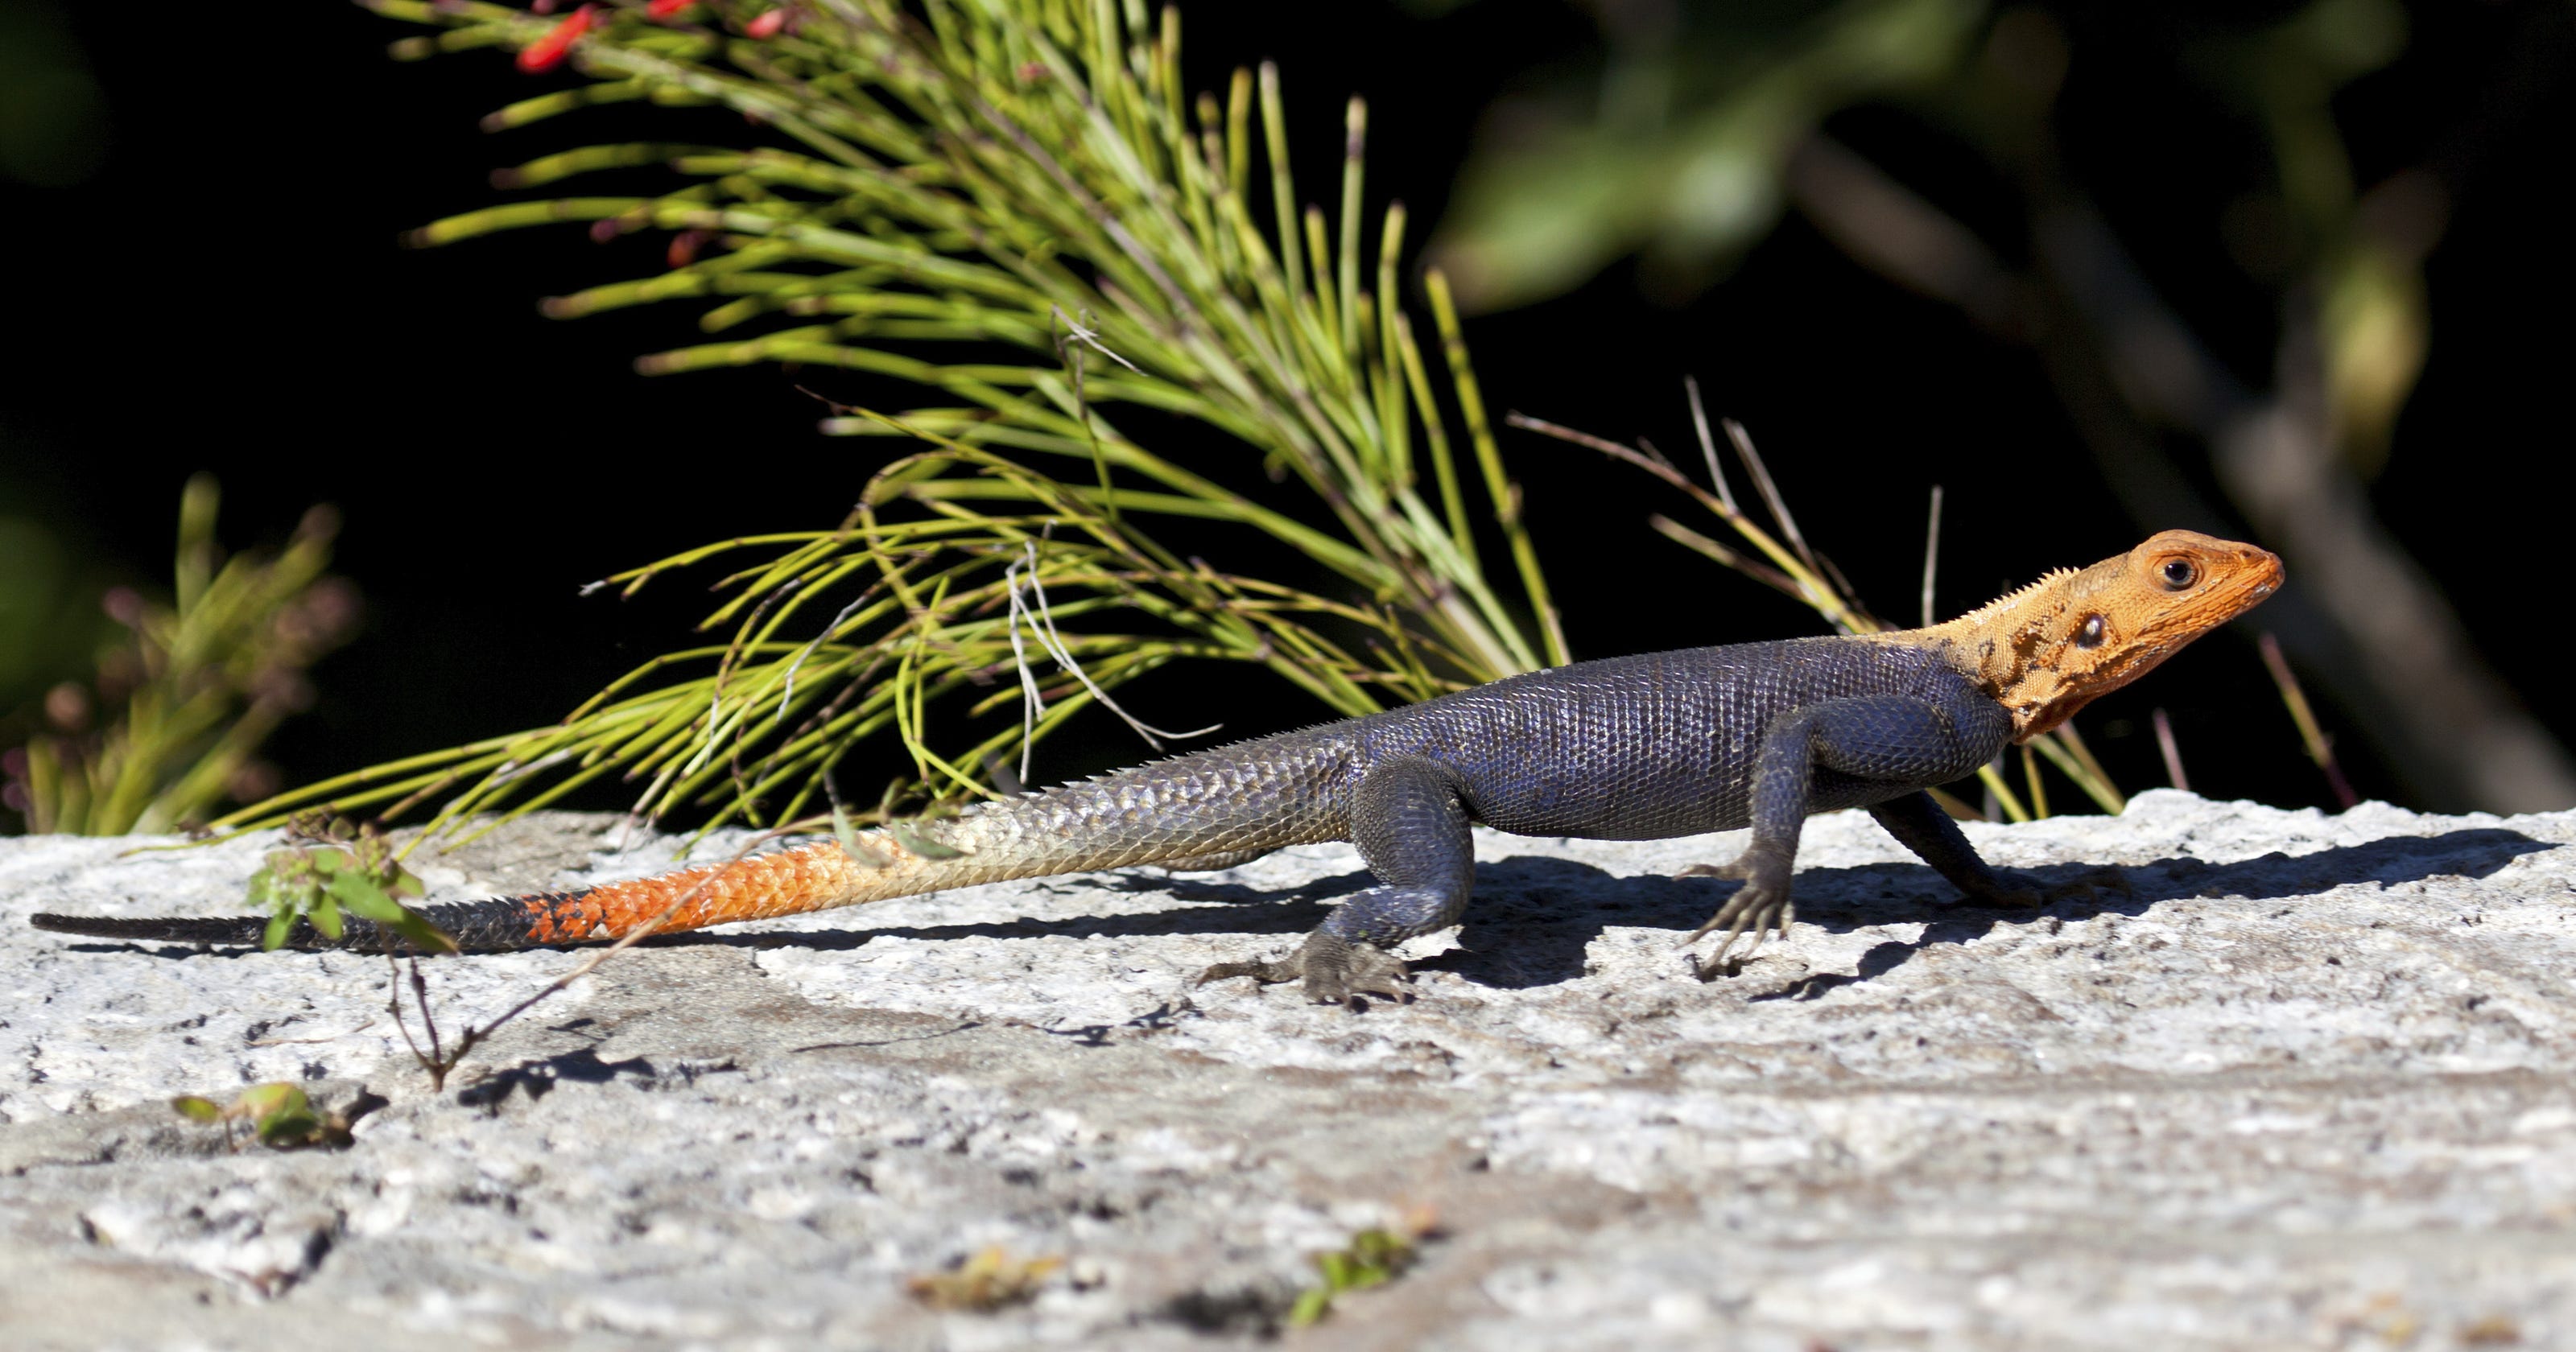 Wild File Redhead Agama Went From Africa To Florida